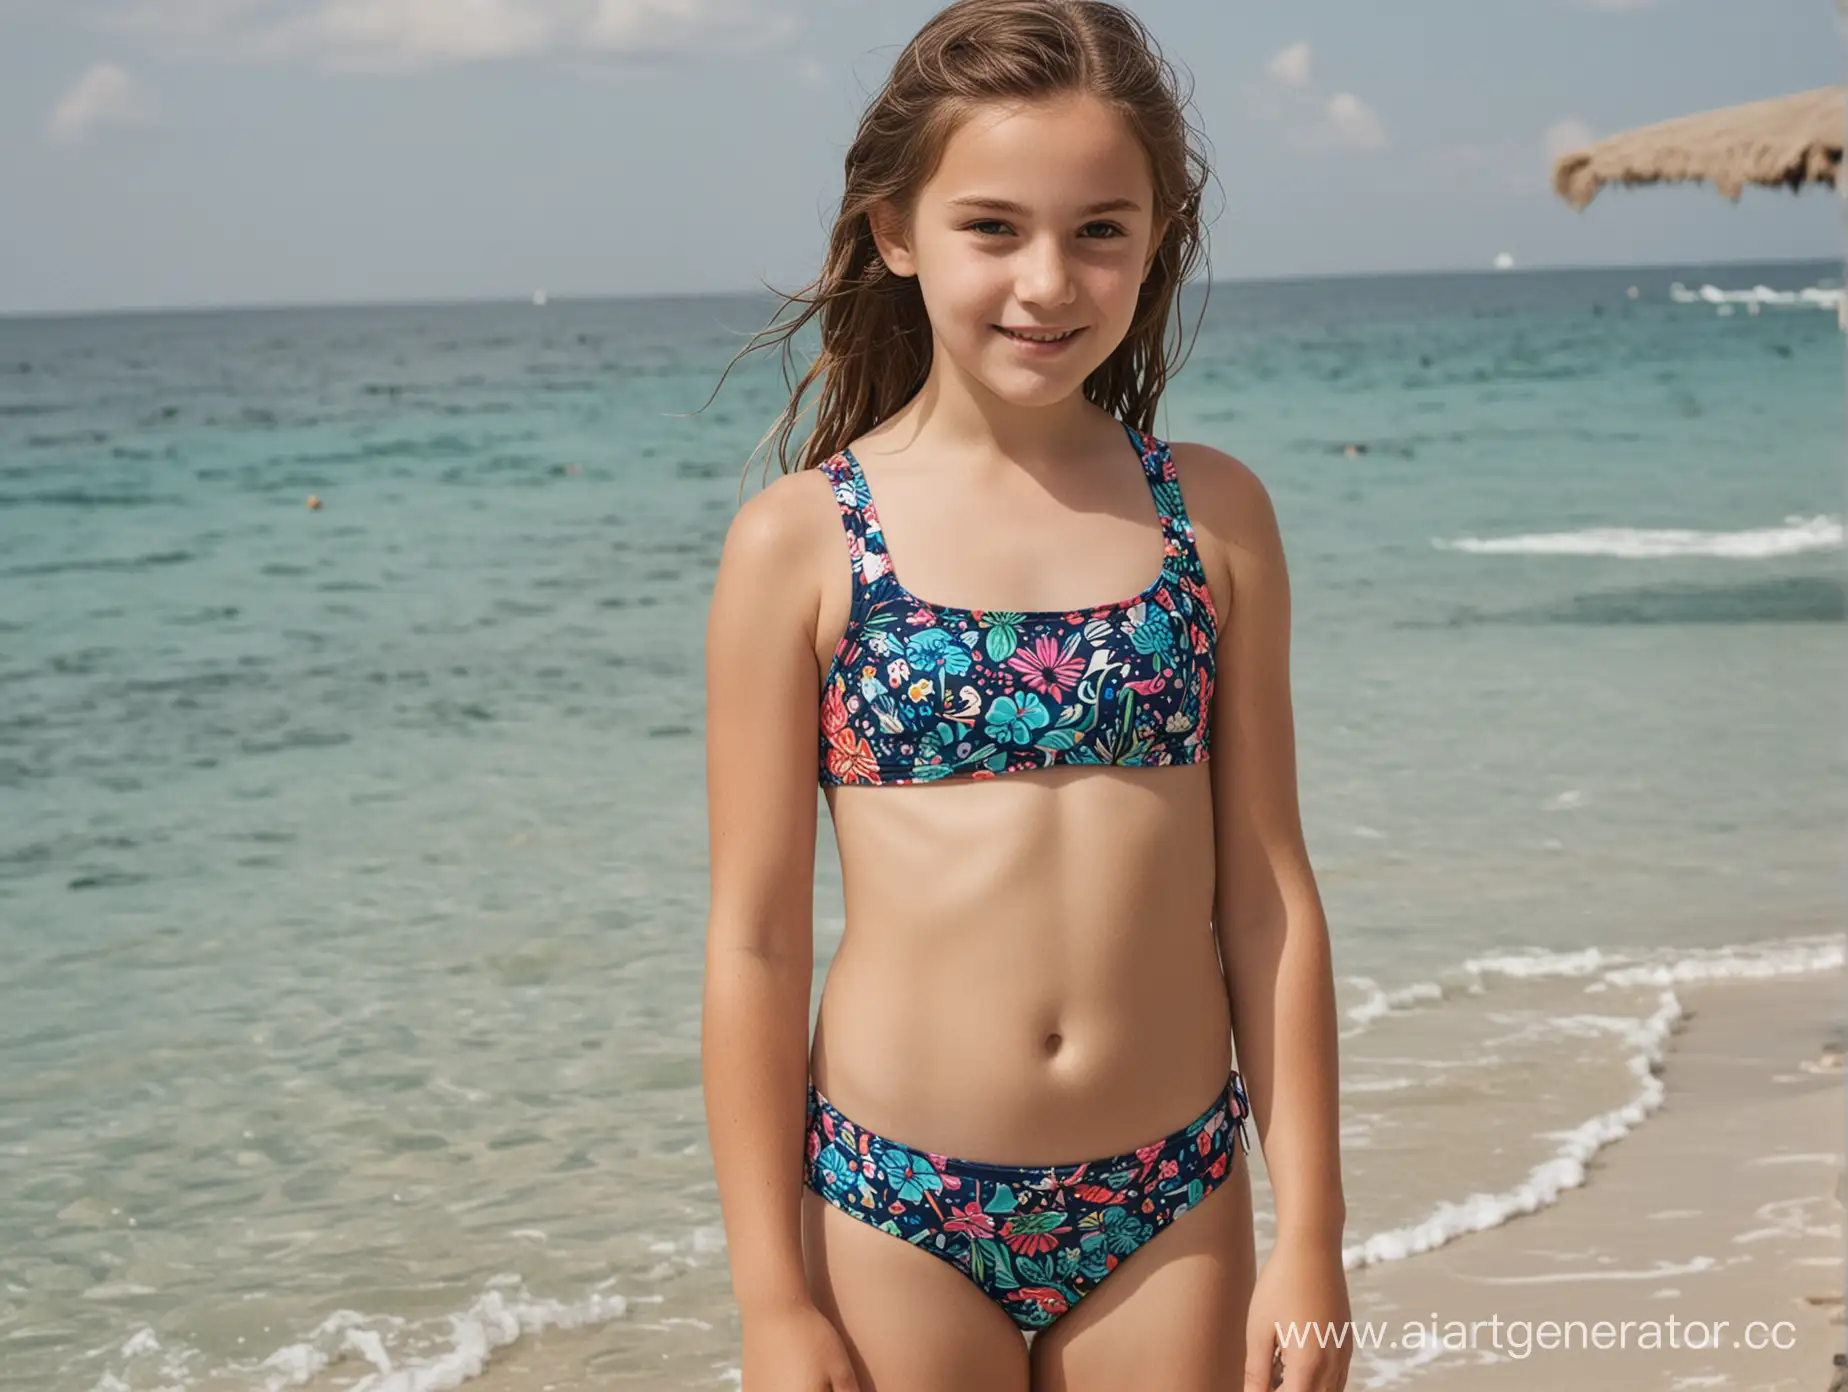 12-year-old girl in a two-piece swimsuit